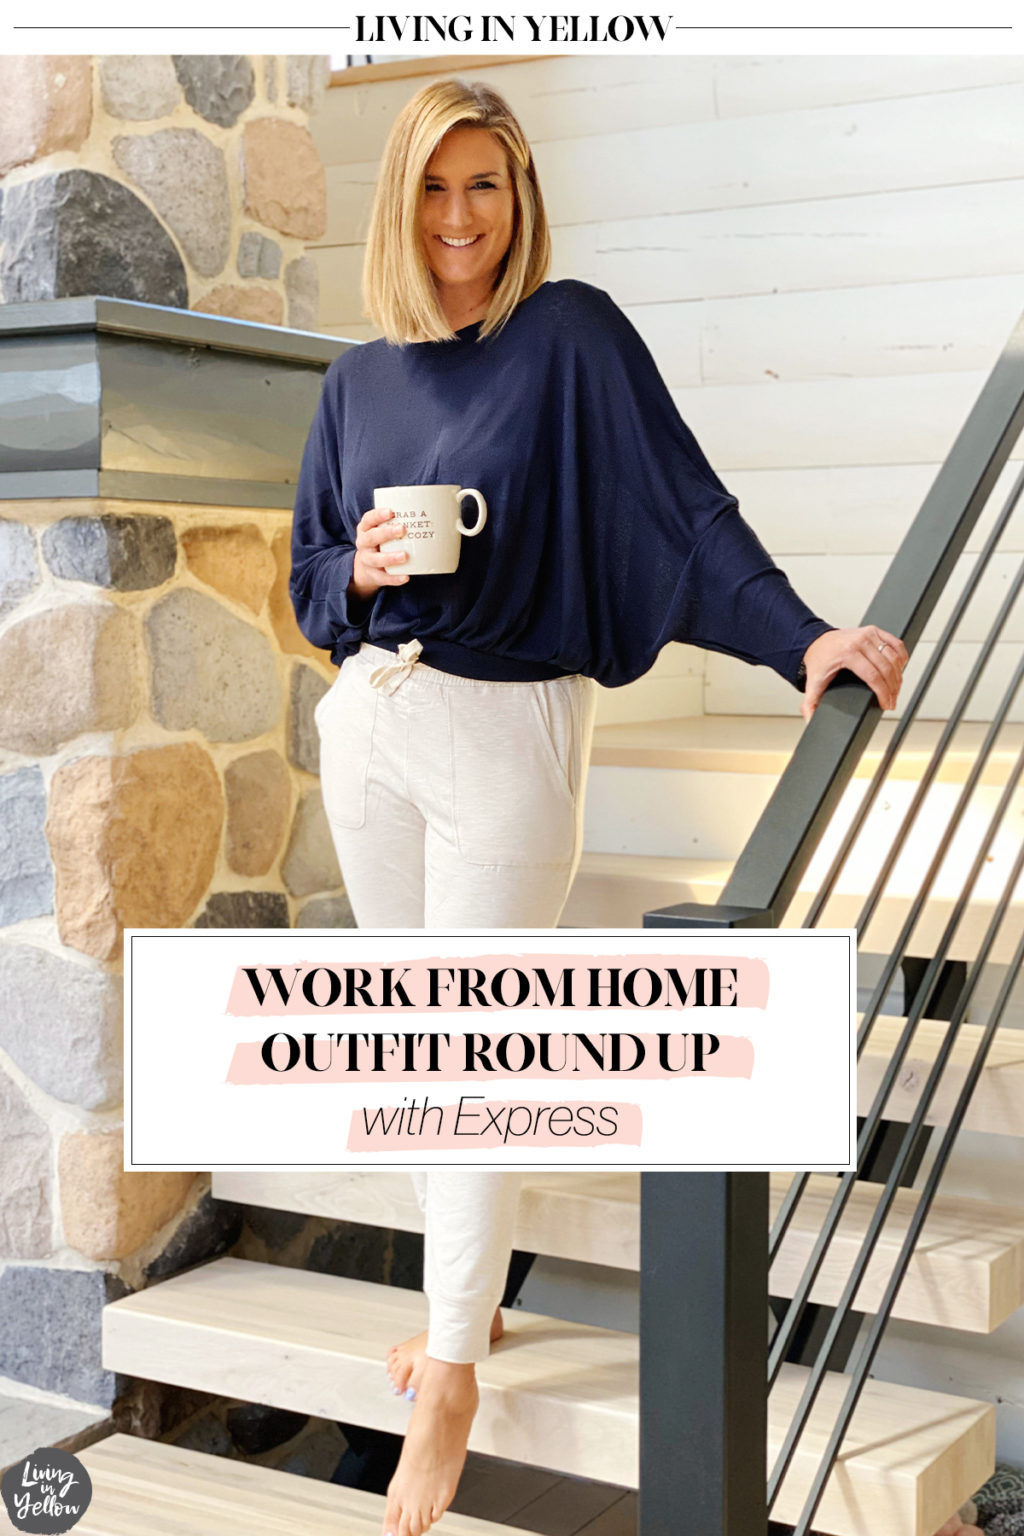 Work From Home Favorites from Express - Living in Yellow